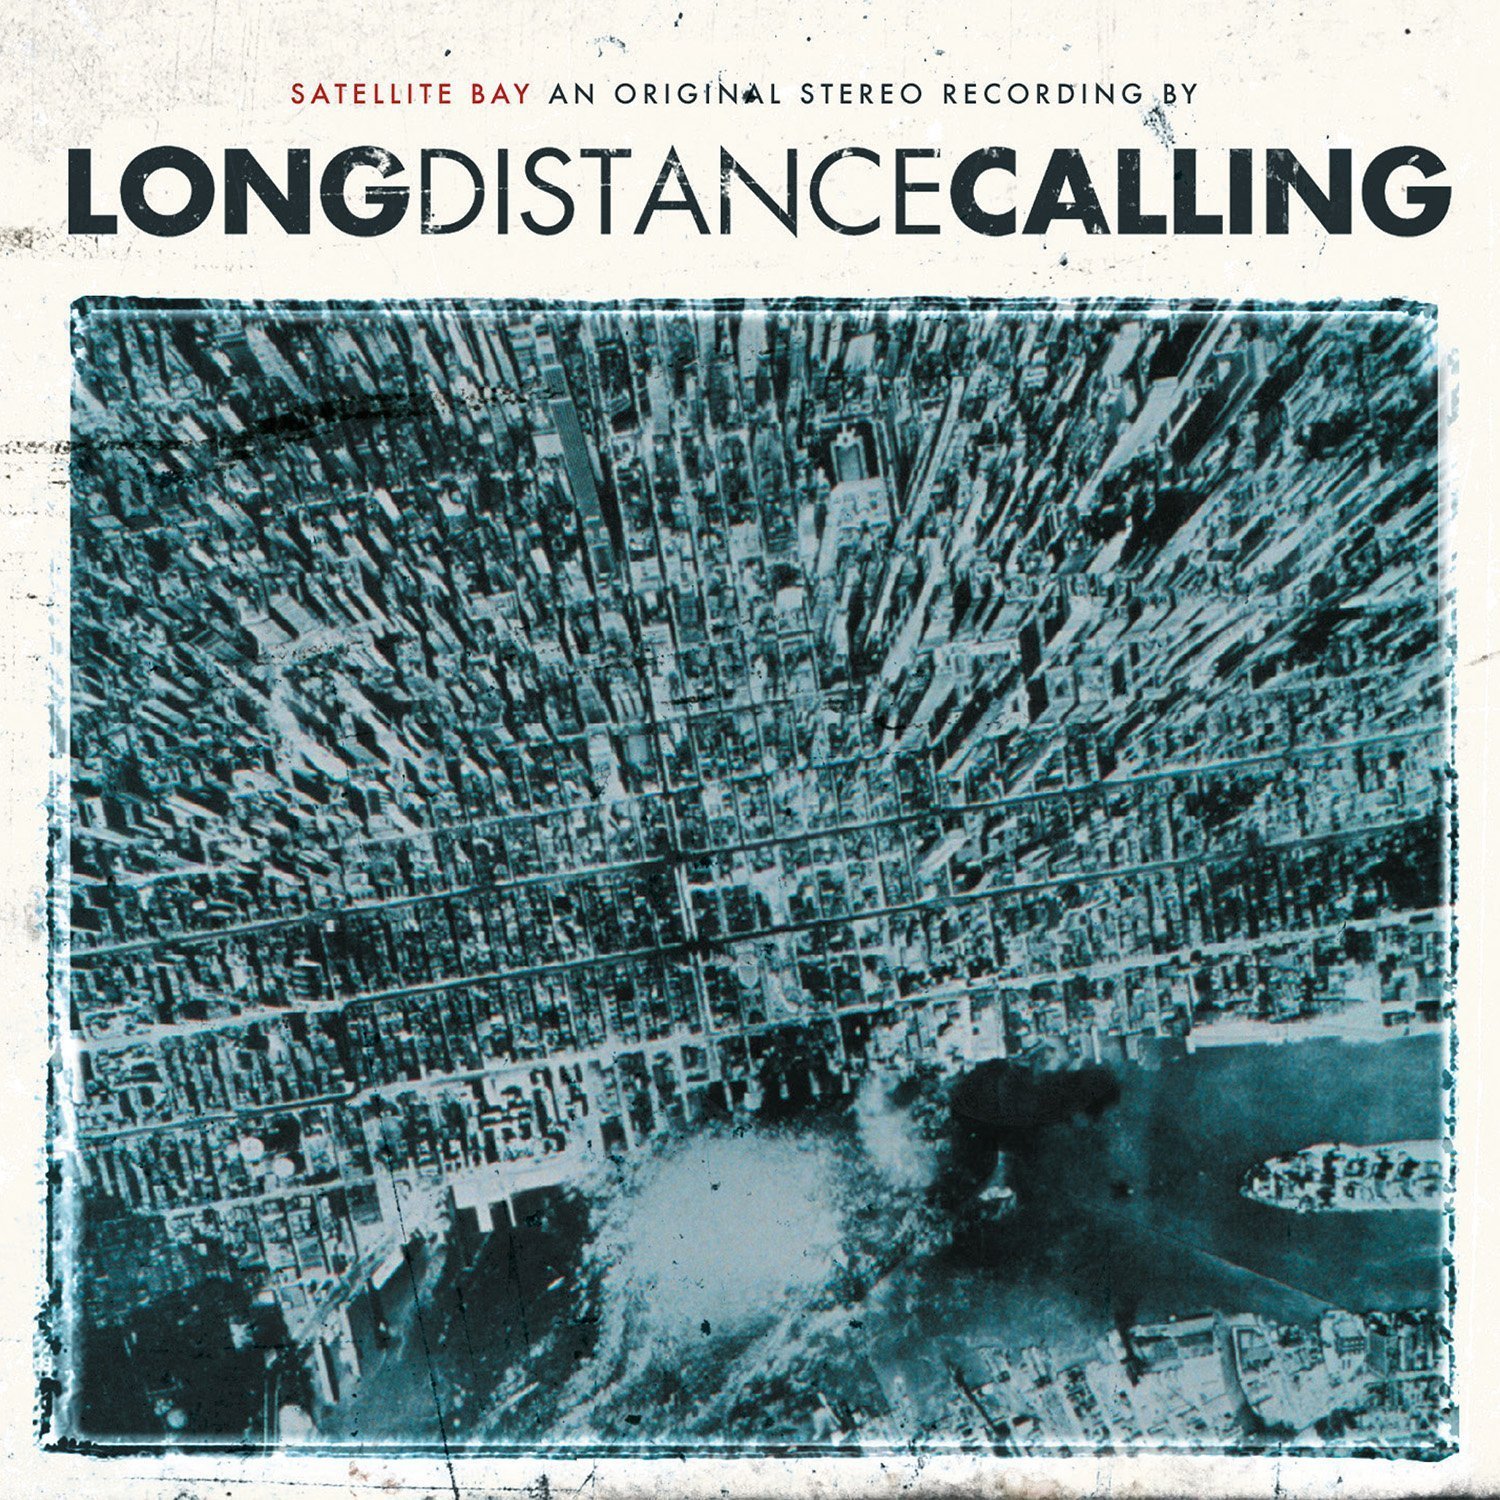 Long Distance Calling Satellite Bay (Special Edition)(2CD)